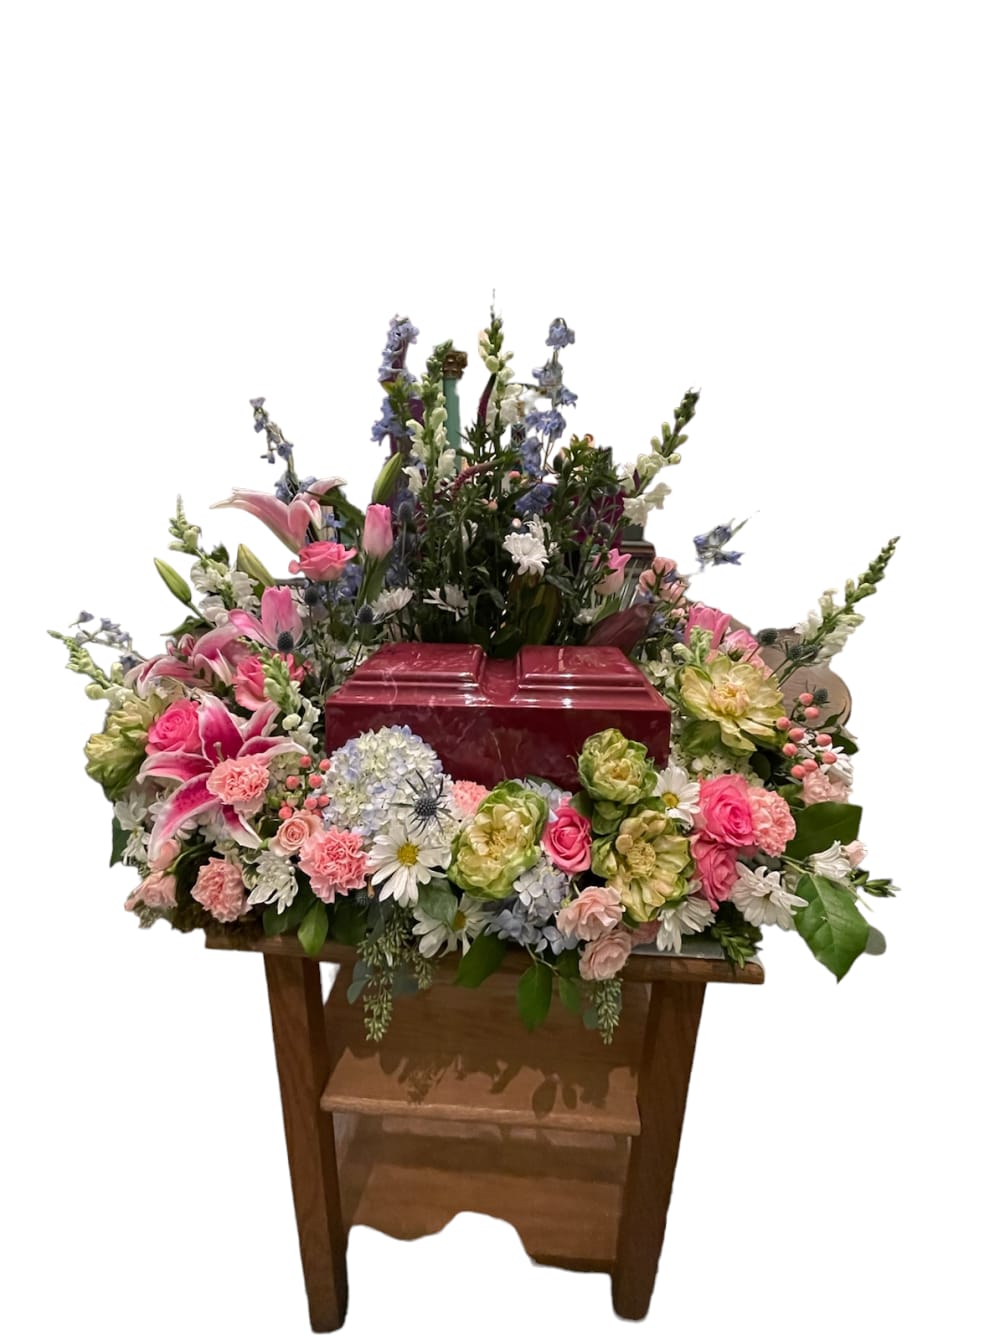 A mix of pastel flowers in an Urn surround